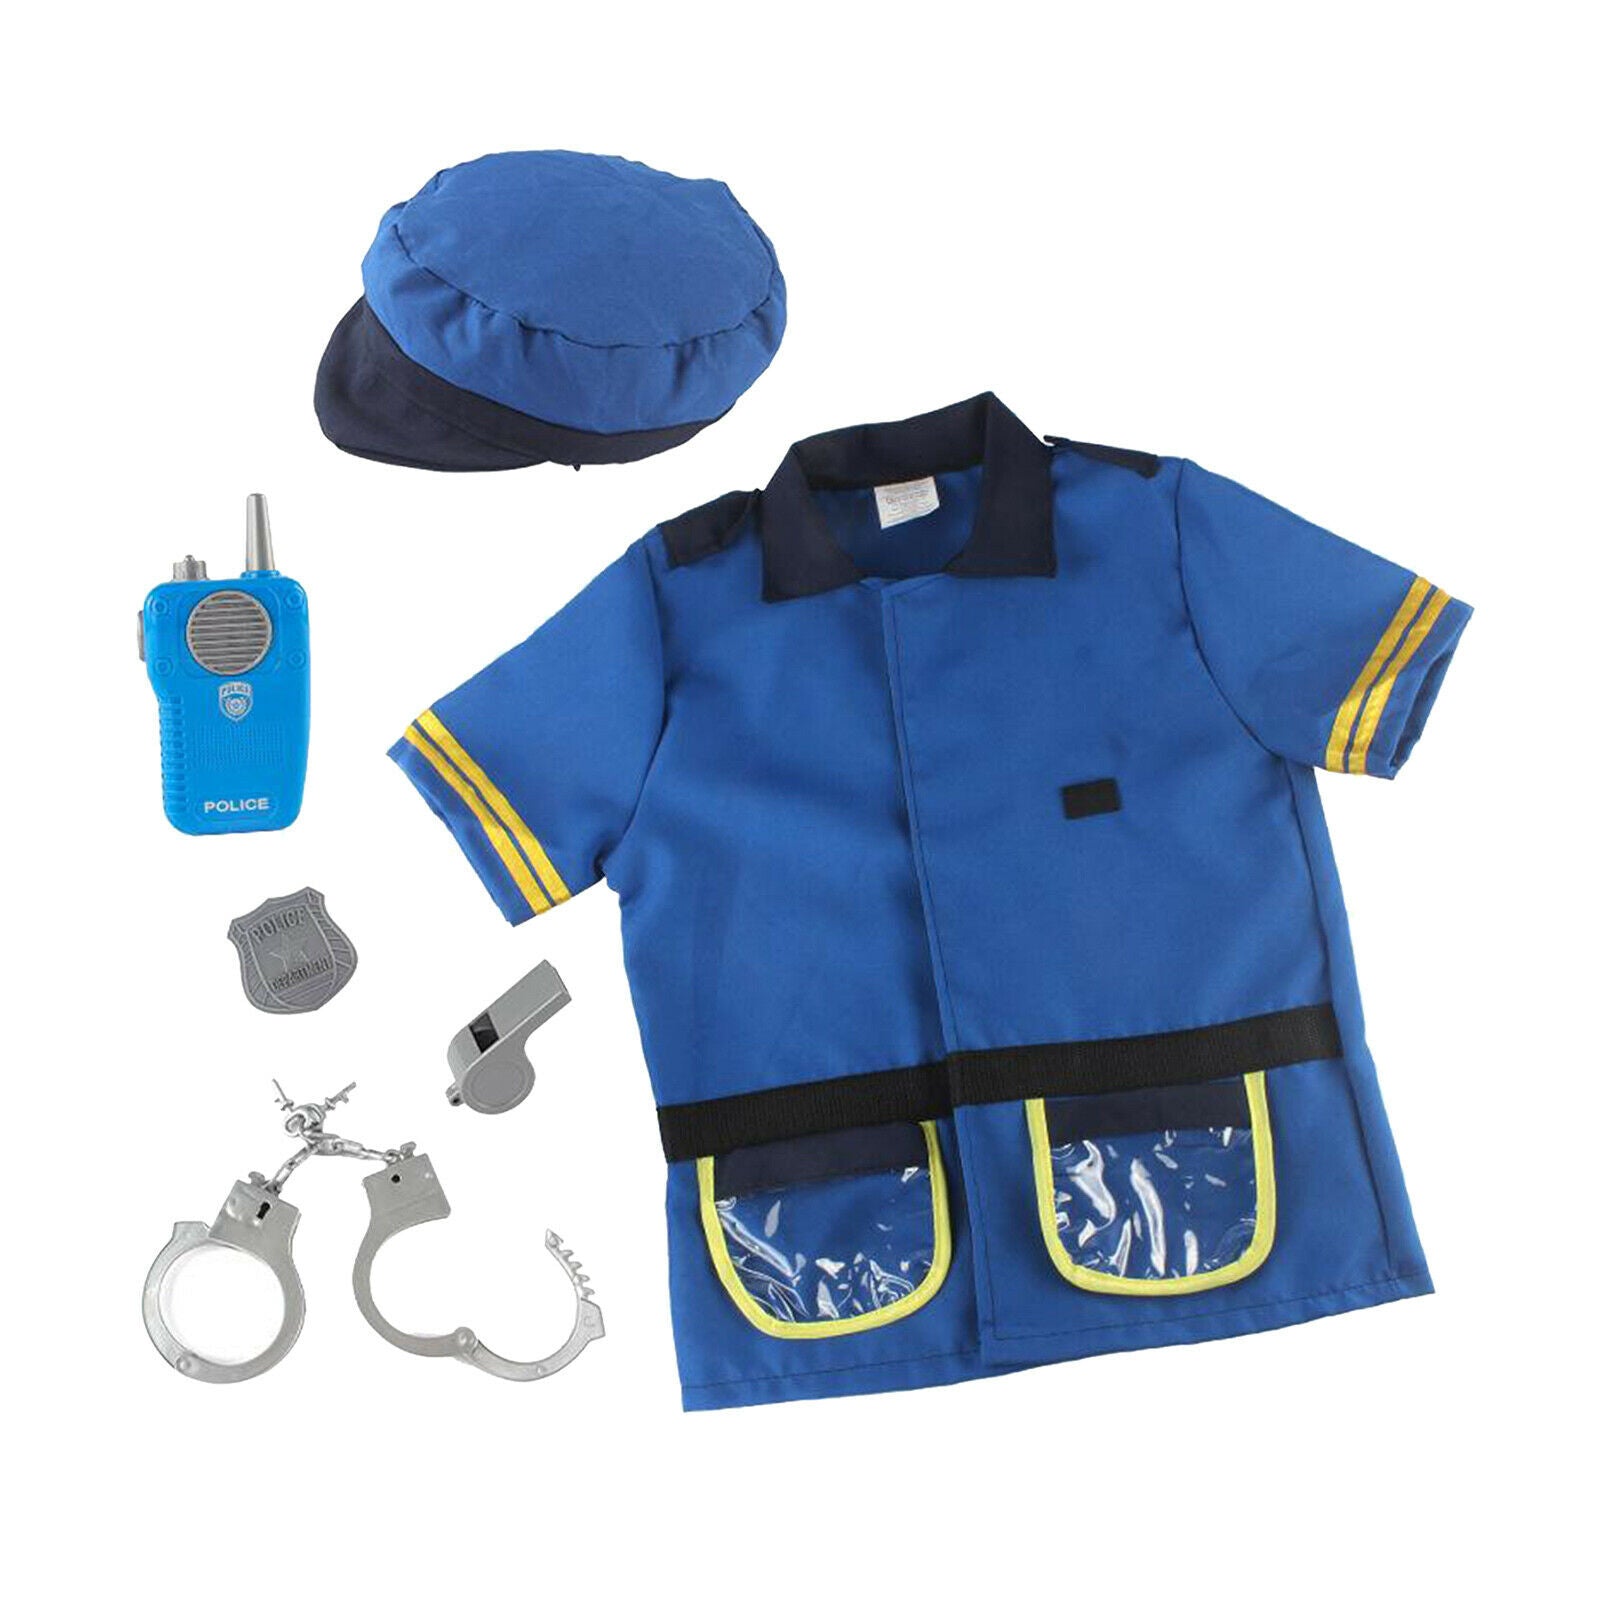 6x Police Officer Costume Sets with Accessories for Kids Role Play Accessories